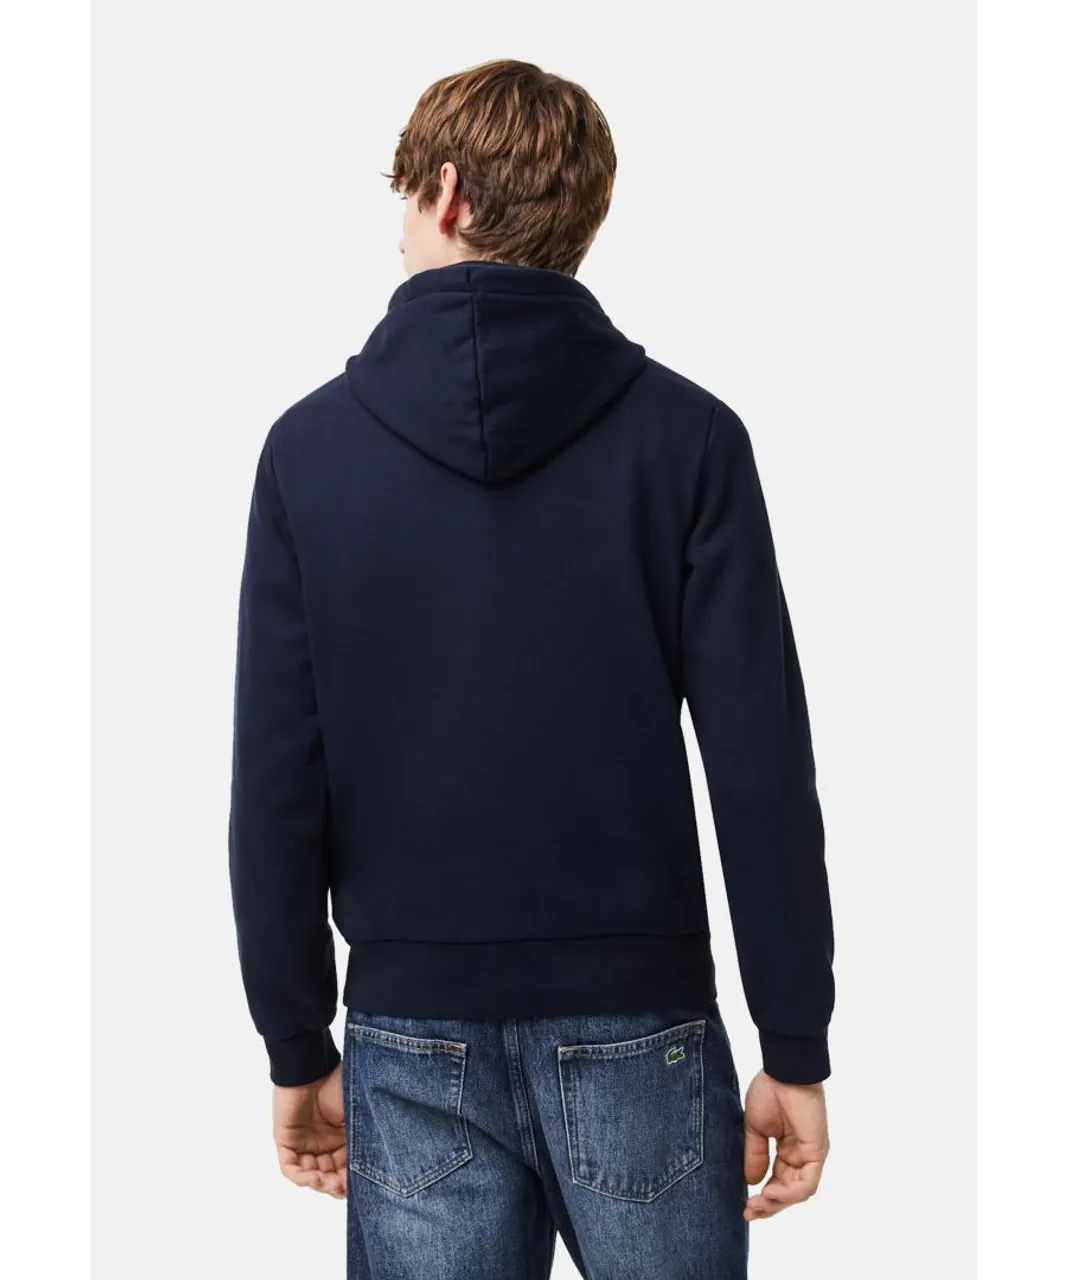 Lacoste Mens sweater - Blue/Navy Cotton